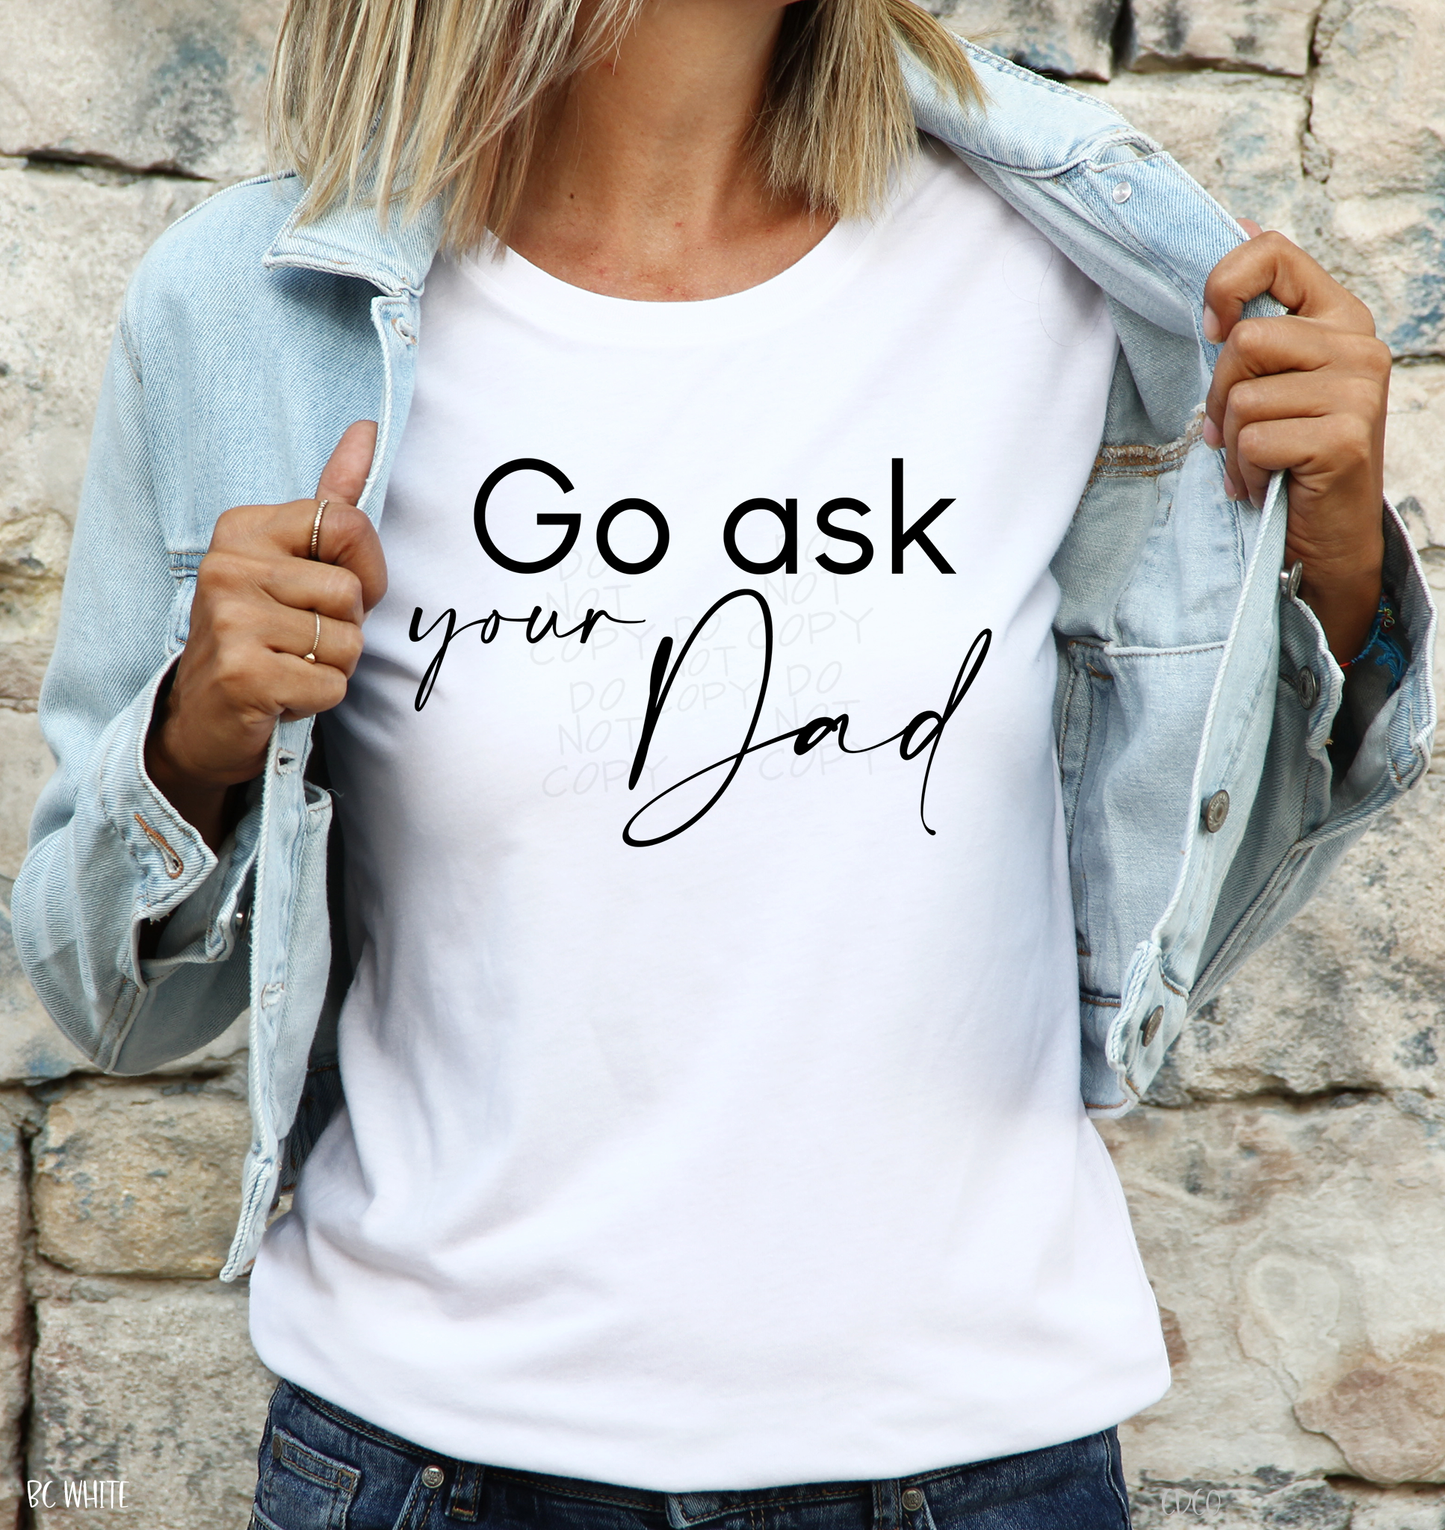 Go Ask Your Dad (325°)